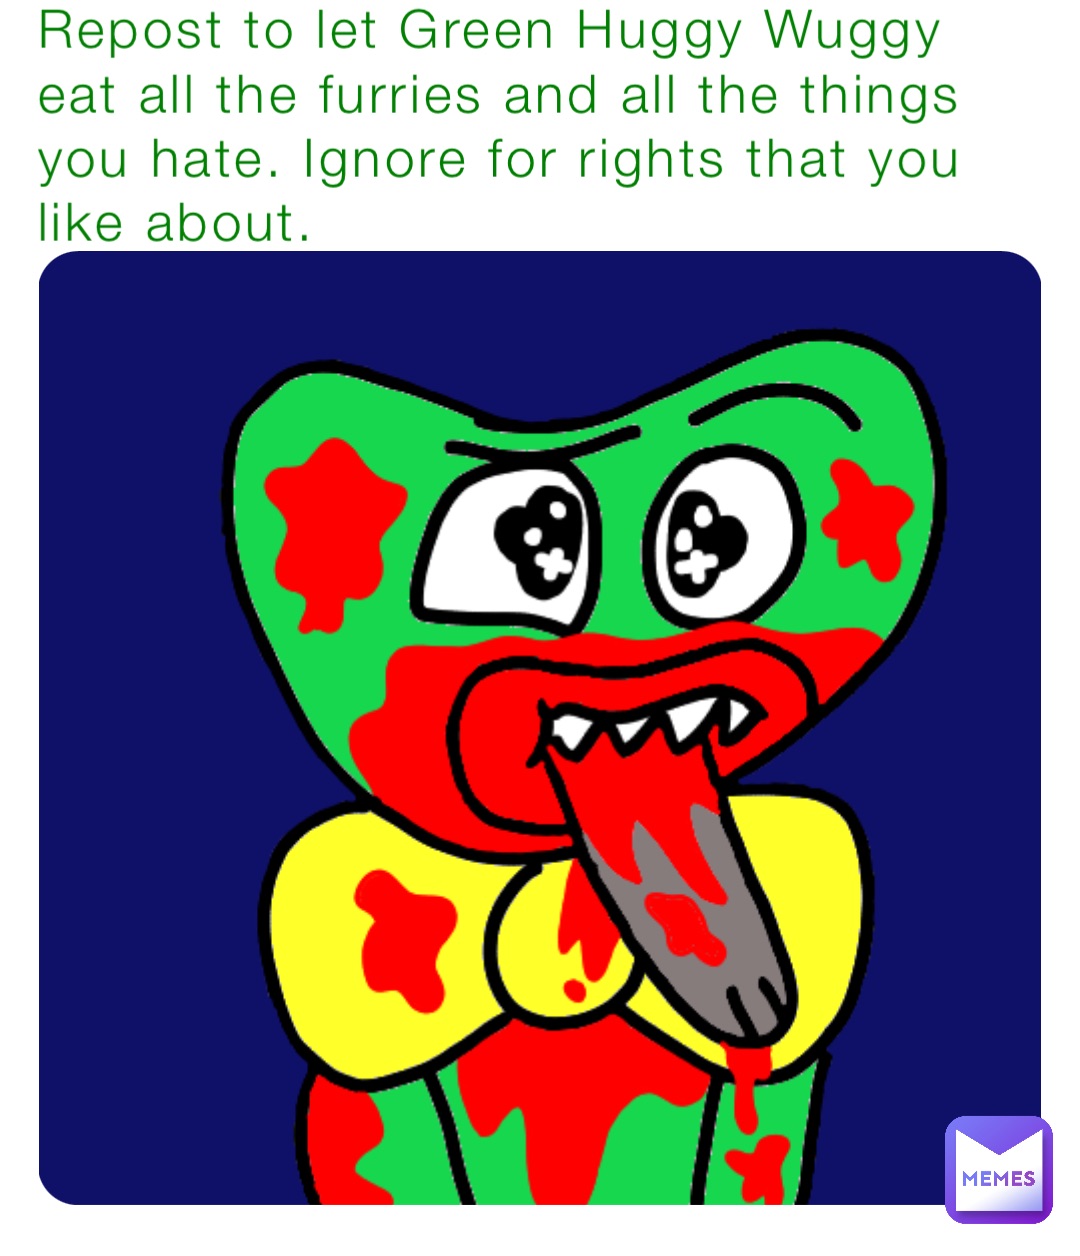 Repost to let Green Huggy Wuggy eat all the furries and all the things you hate. Ignore for rights that you like about.